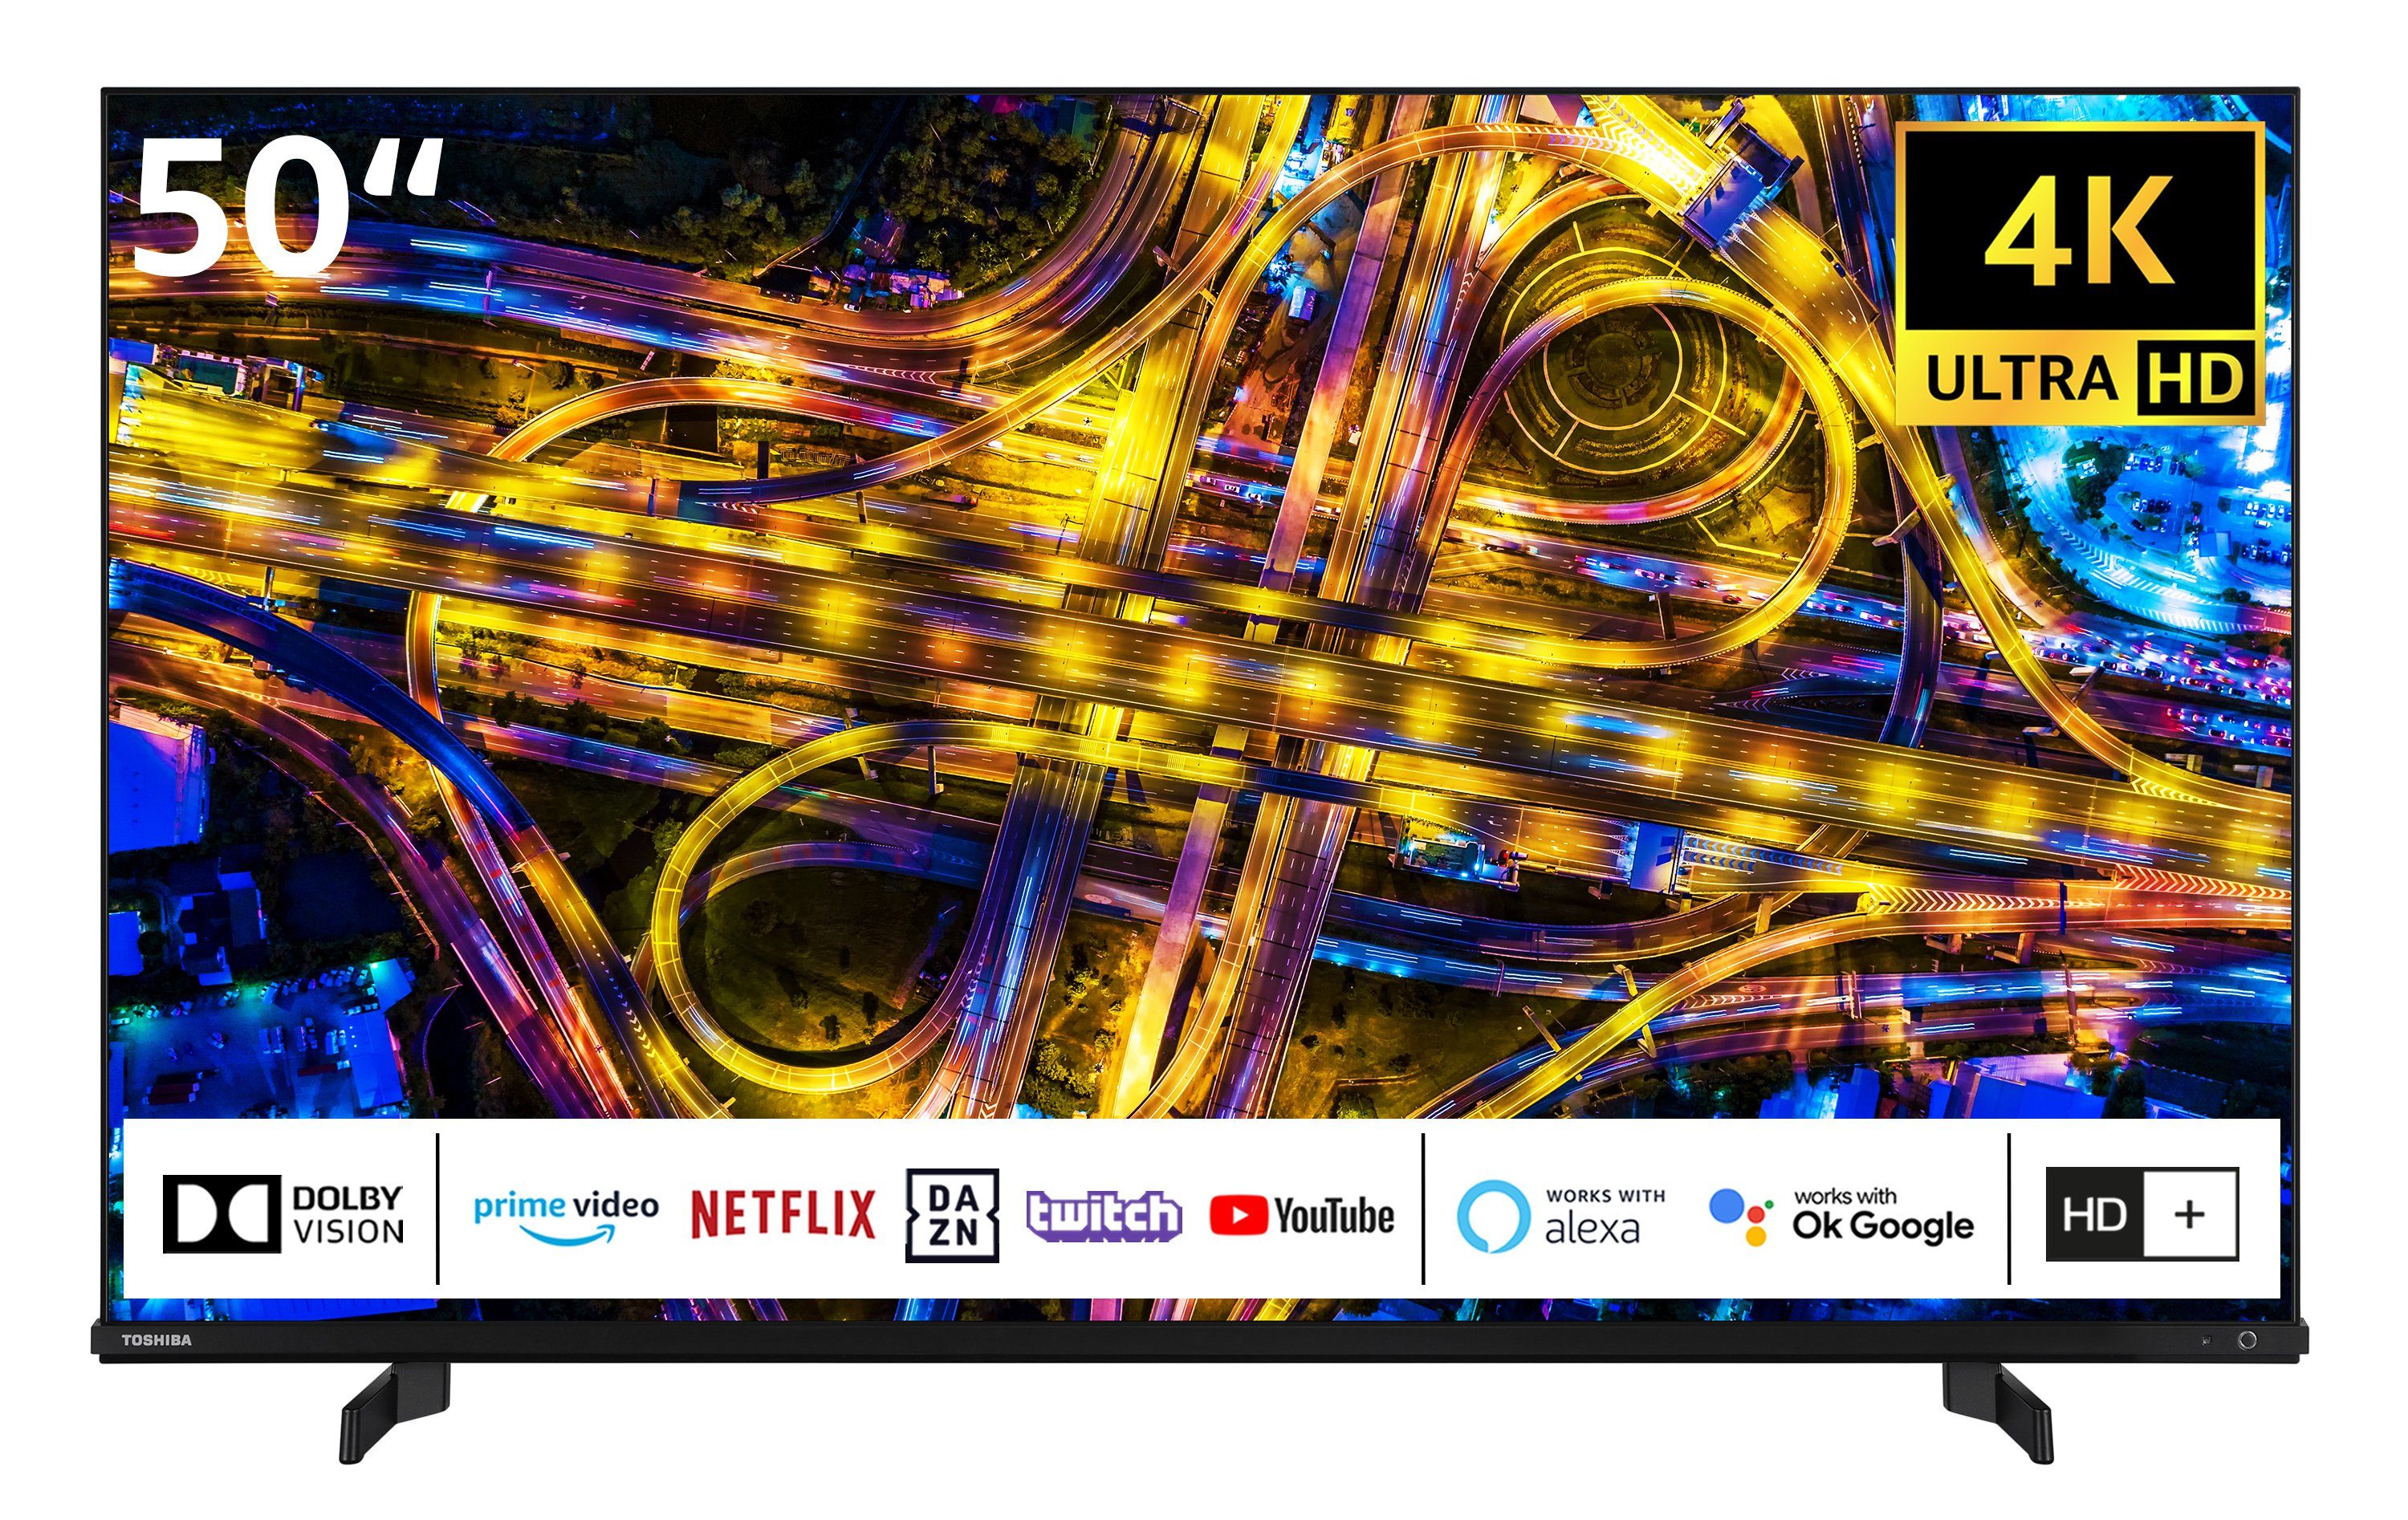 Onkyo, Toshiba Smart by LCD-LED Sound Vision, cm/50 (126 Fernseher TV, 50UL4D63DGY Dolby Ultra HDR HD, 4K WLAN) Zoll, Triple-Tuner,